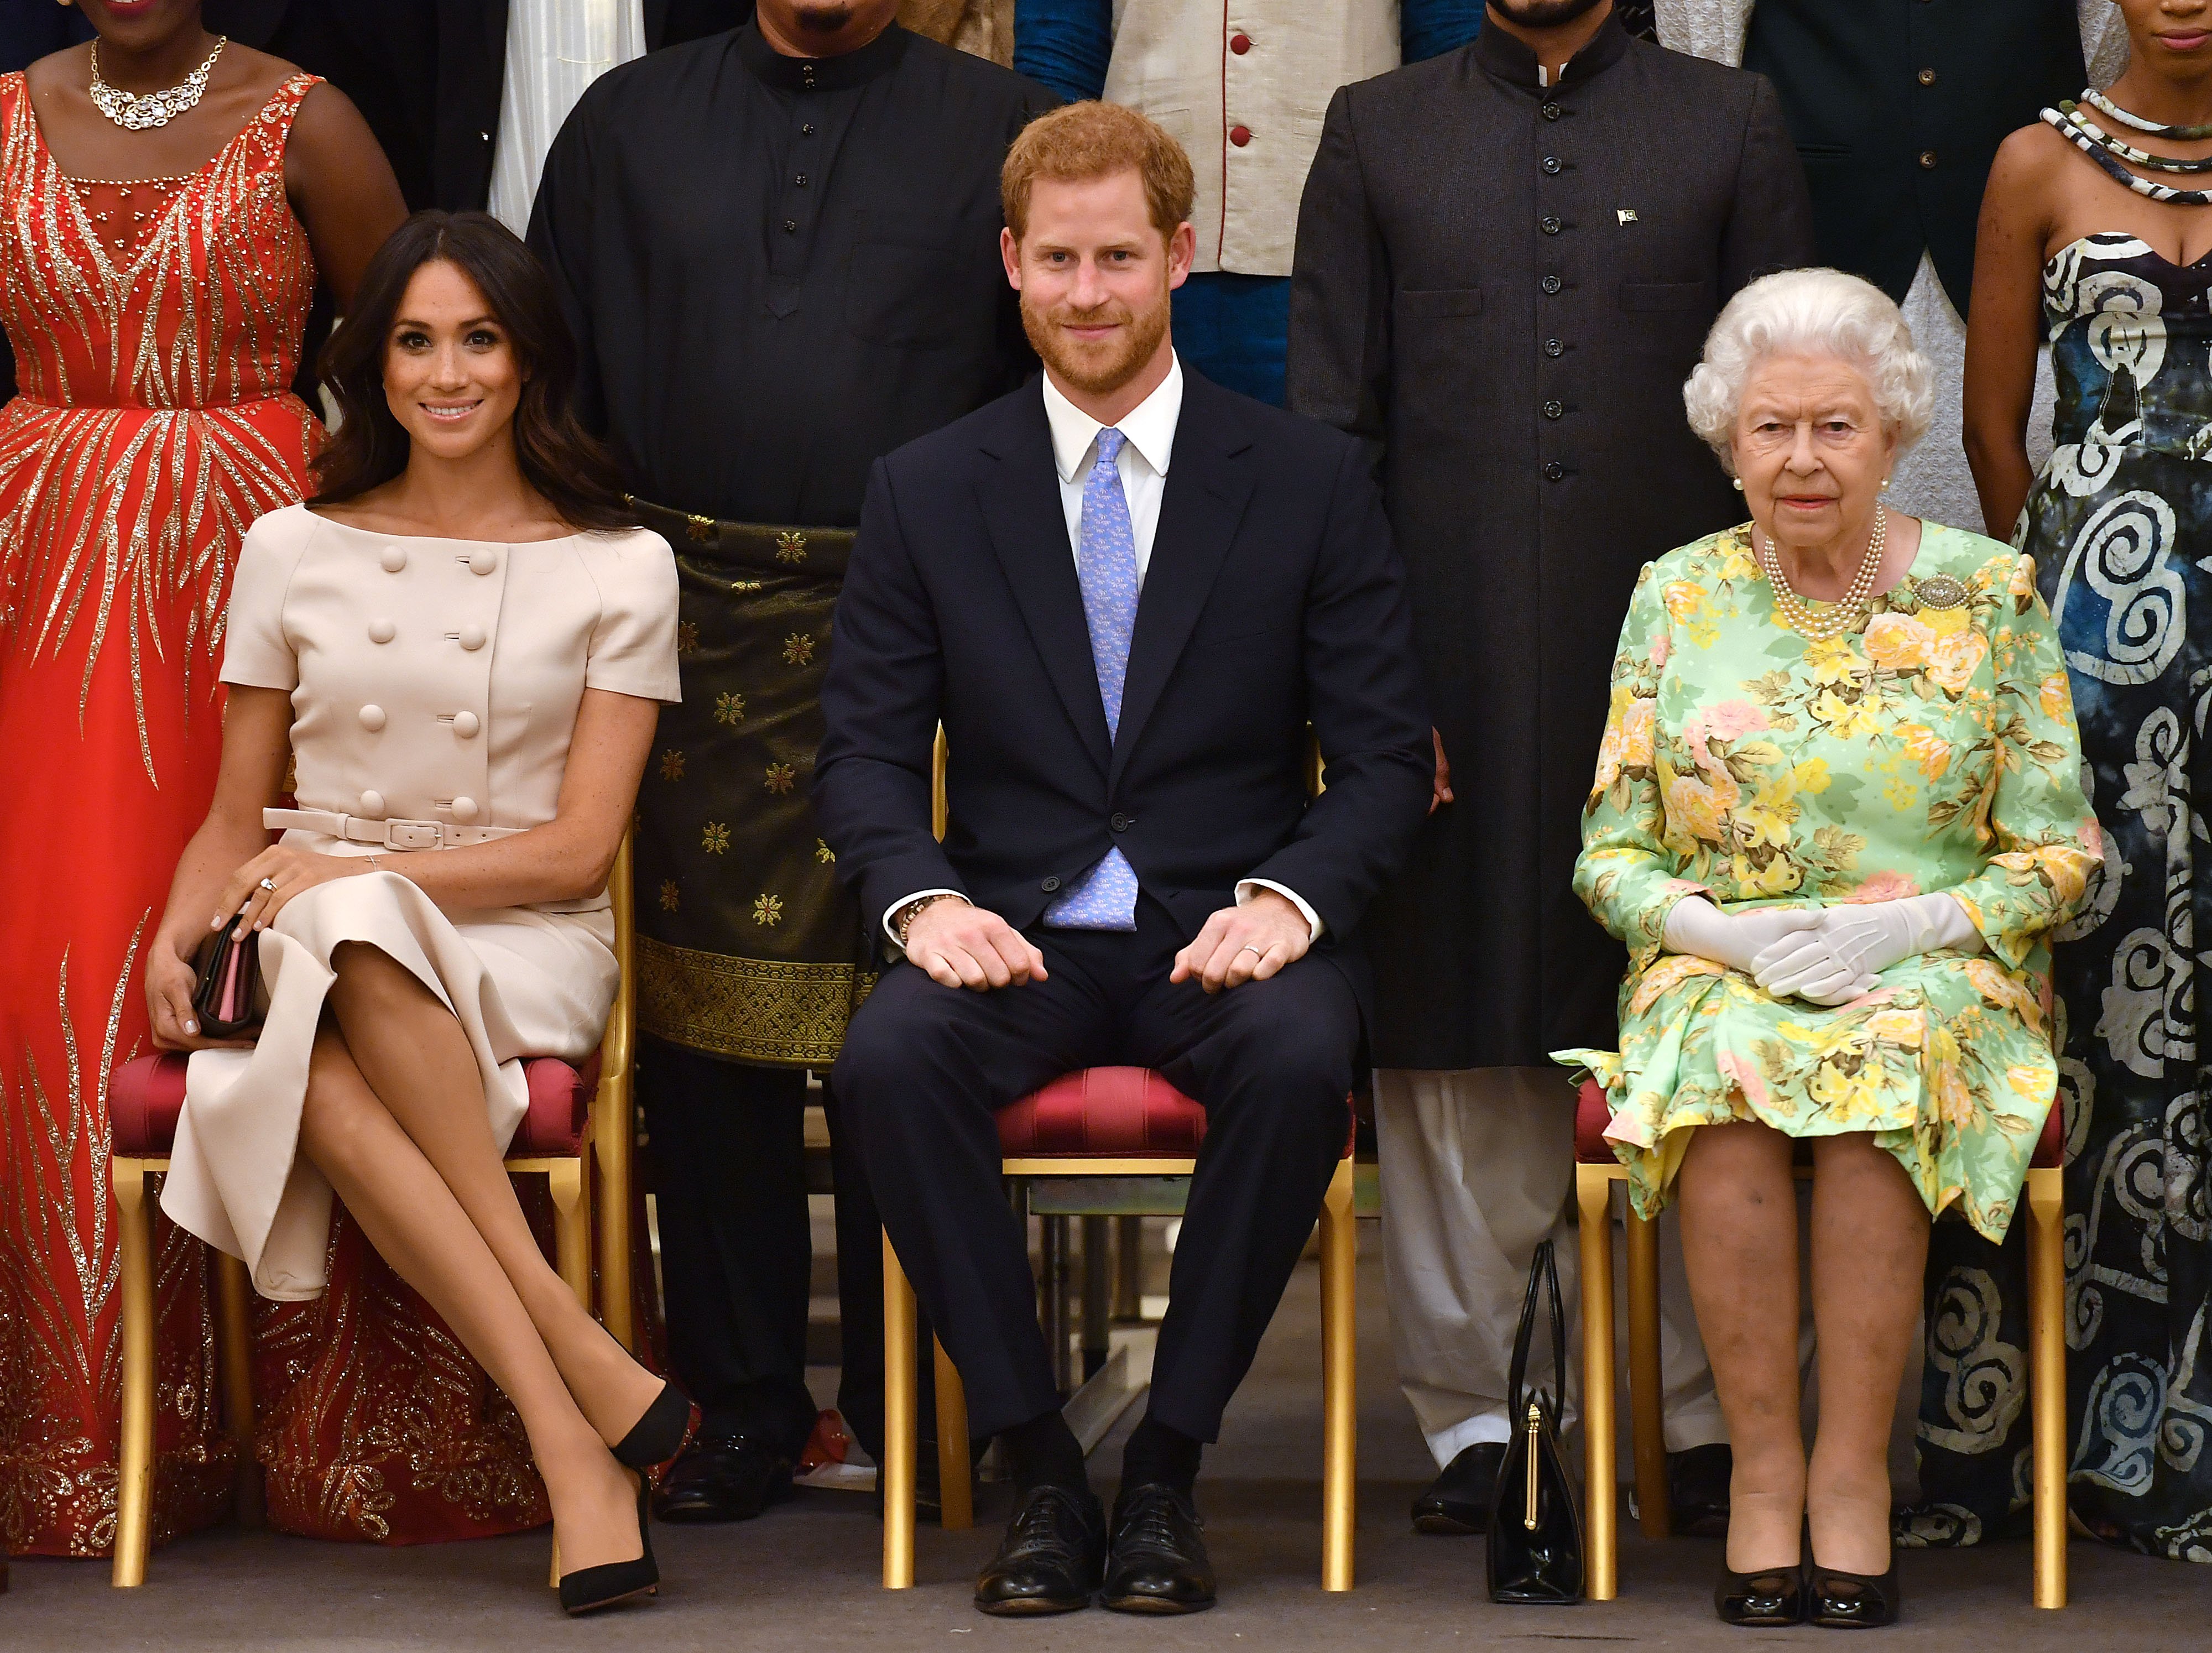 Queen Elizabeth II, Prince Harry, and Meghan Markle in London, 2022. | Source: Getty images 